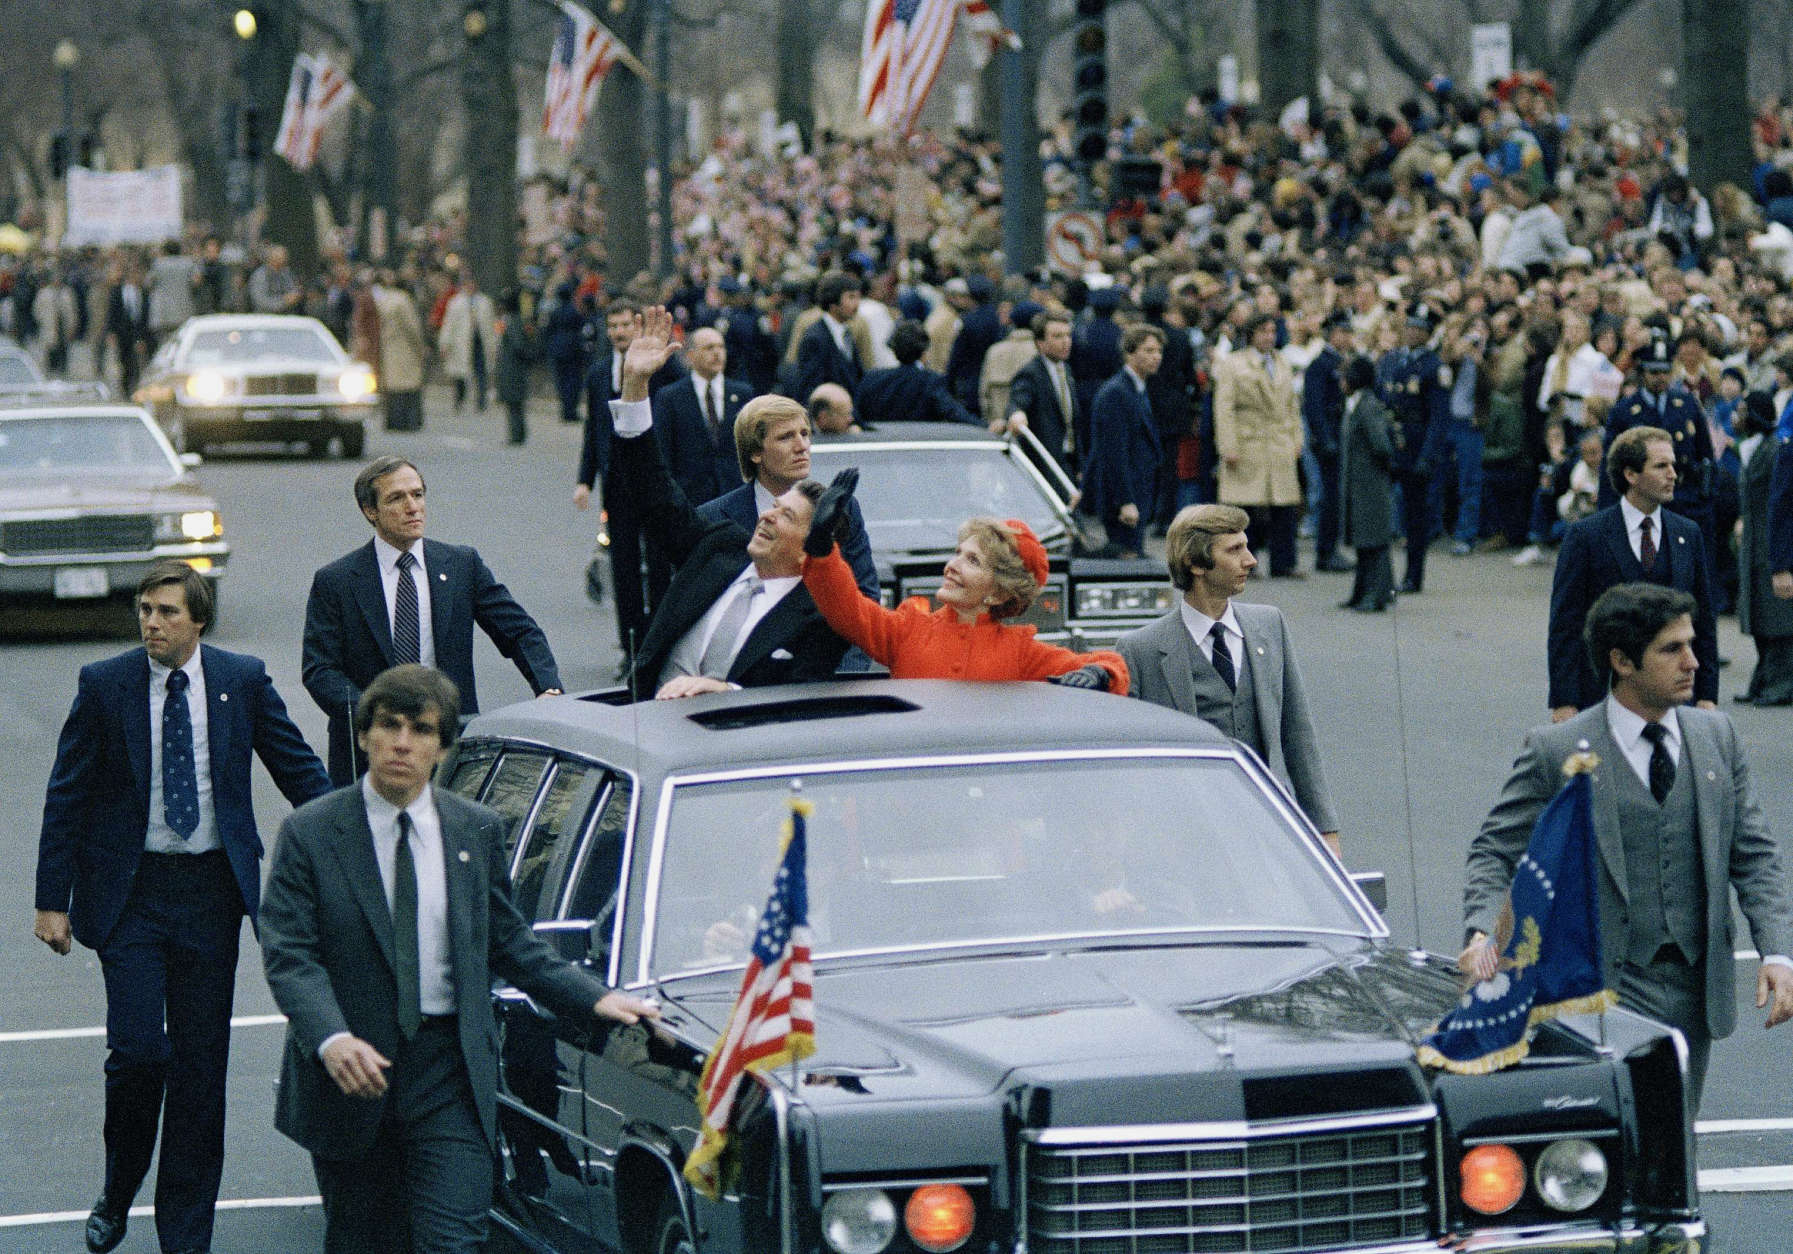 President Ronald Reagan and first lady Nancy Reagan wave from their limousine during the inaugural parade in Washington, D.C., Jan. 20, 1981. (AP Photo)